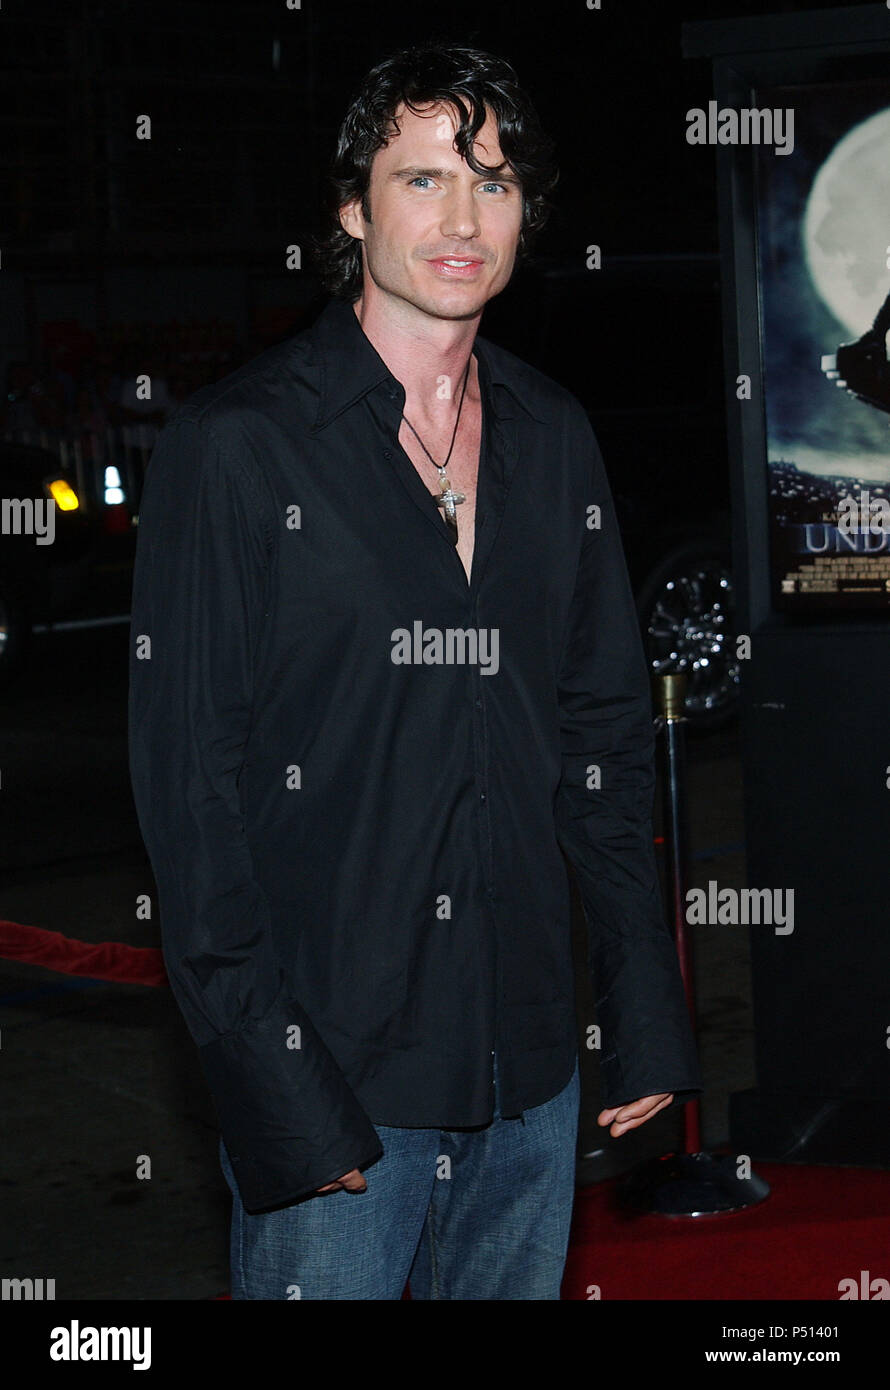 Shane Brolly arriving at the ' Underworld Premiere ' at the Chinese Theatre in Los Angeles. September 15, 2003.BrollyShane69 Red Carpet Event, Vertical, USA, Film Industry, Celebrities,  Photography, Bestof, Arts Culture and Entertainment, Topix Celebrities fashion /  Vertical, Best of, Event in Hollywood Life - California,  Red Carpet and backstage, USA, Film Industry, Celebrities,  movie celebrities, TV celebrities, Music celebrities, Photography, Bestof, Arts Culture and Entertainment,  Topix, vertical, one person,, from the years , 2003 to 2005, inquiry tsuni@Gamma-USA.com - Three Quarters Stock Photo